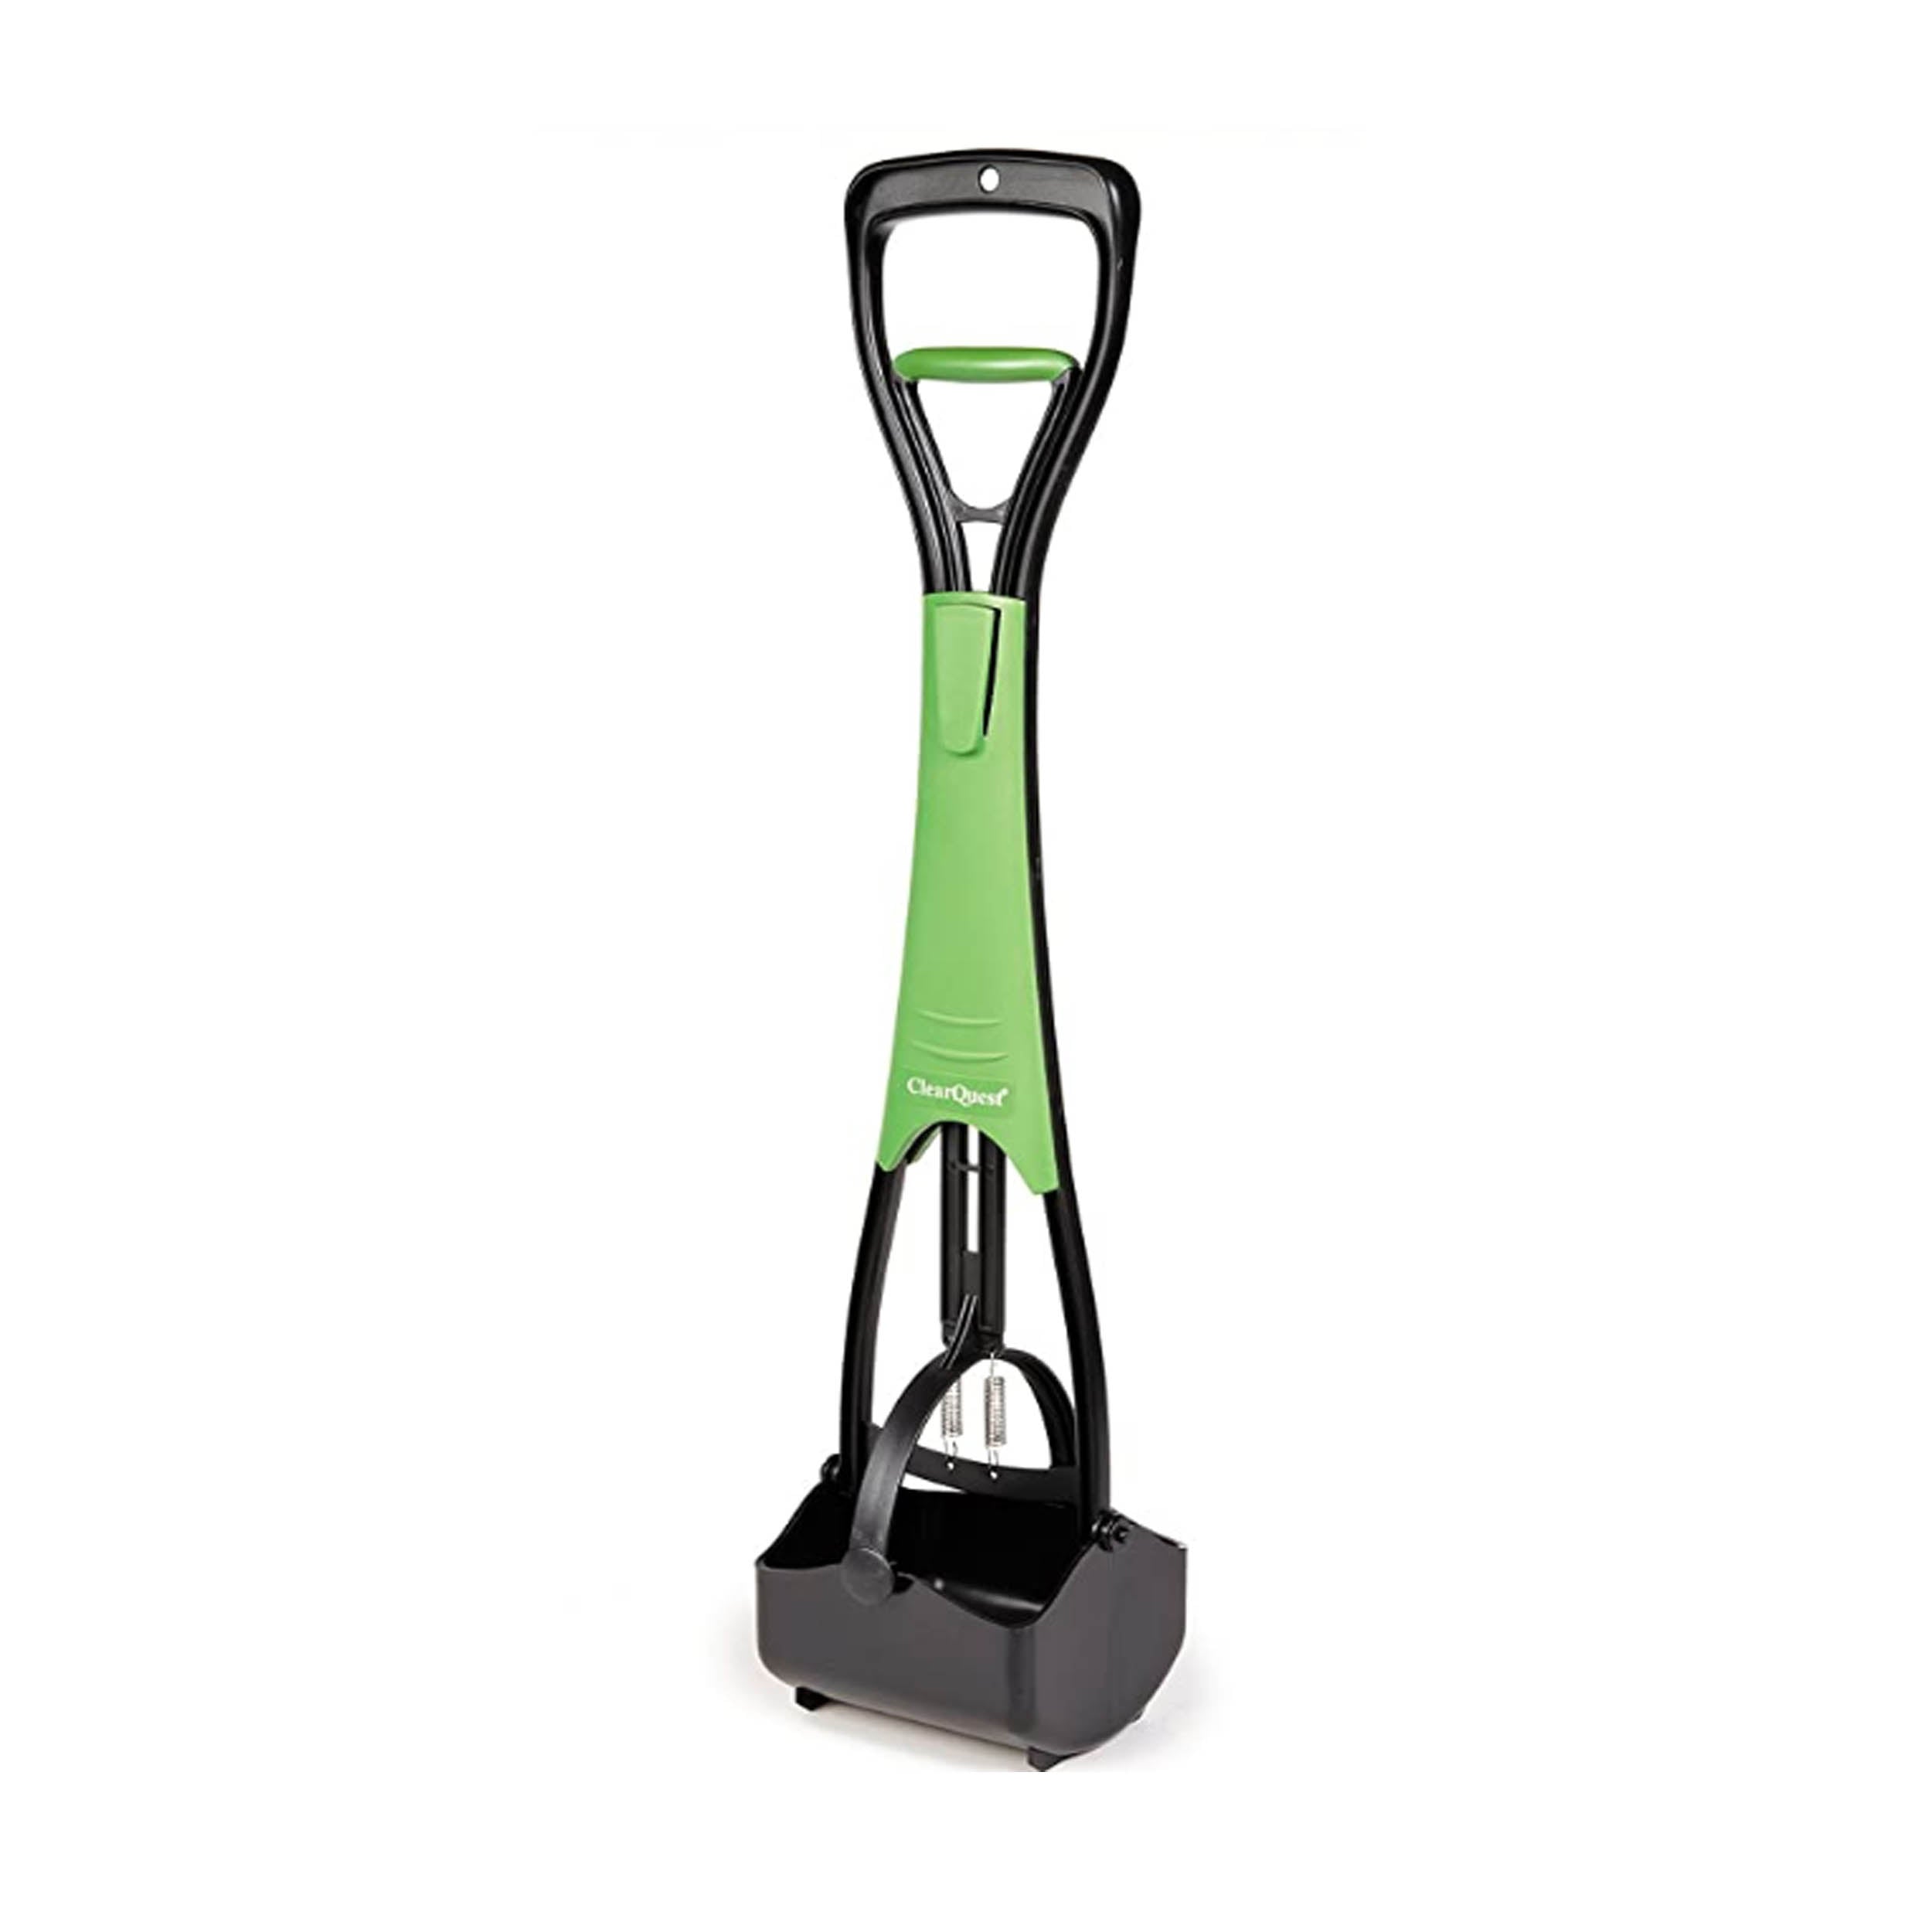 Clear Quest Poop Scooper for No mess Waste Management Green with Black Scooping Mechanisms